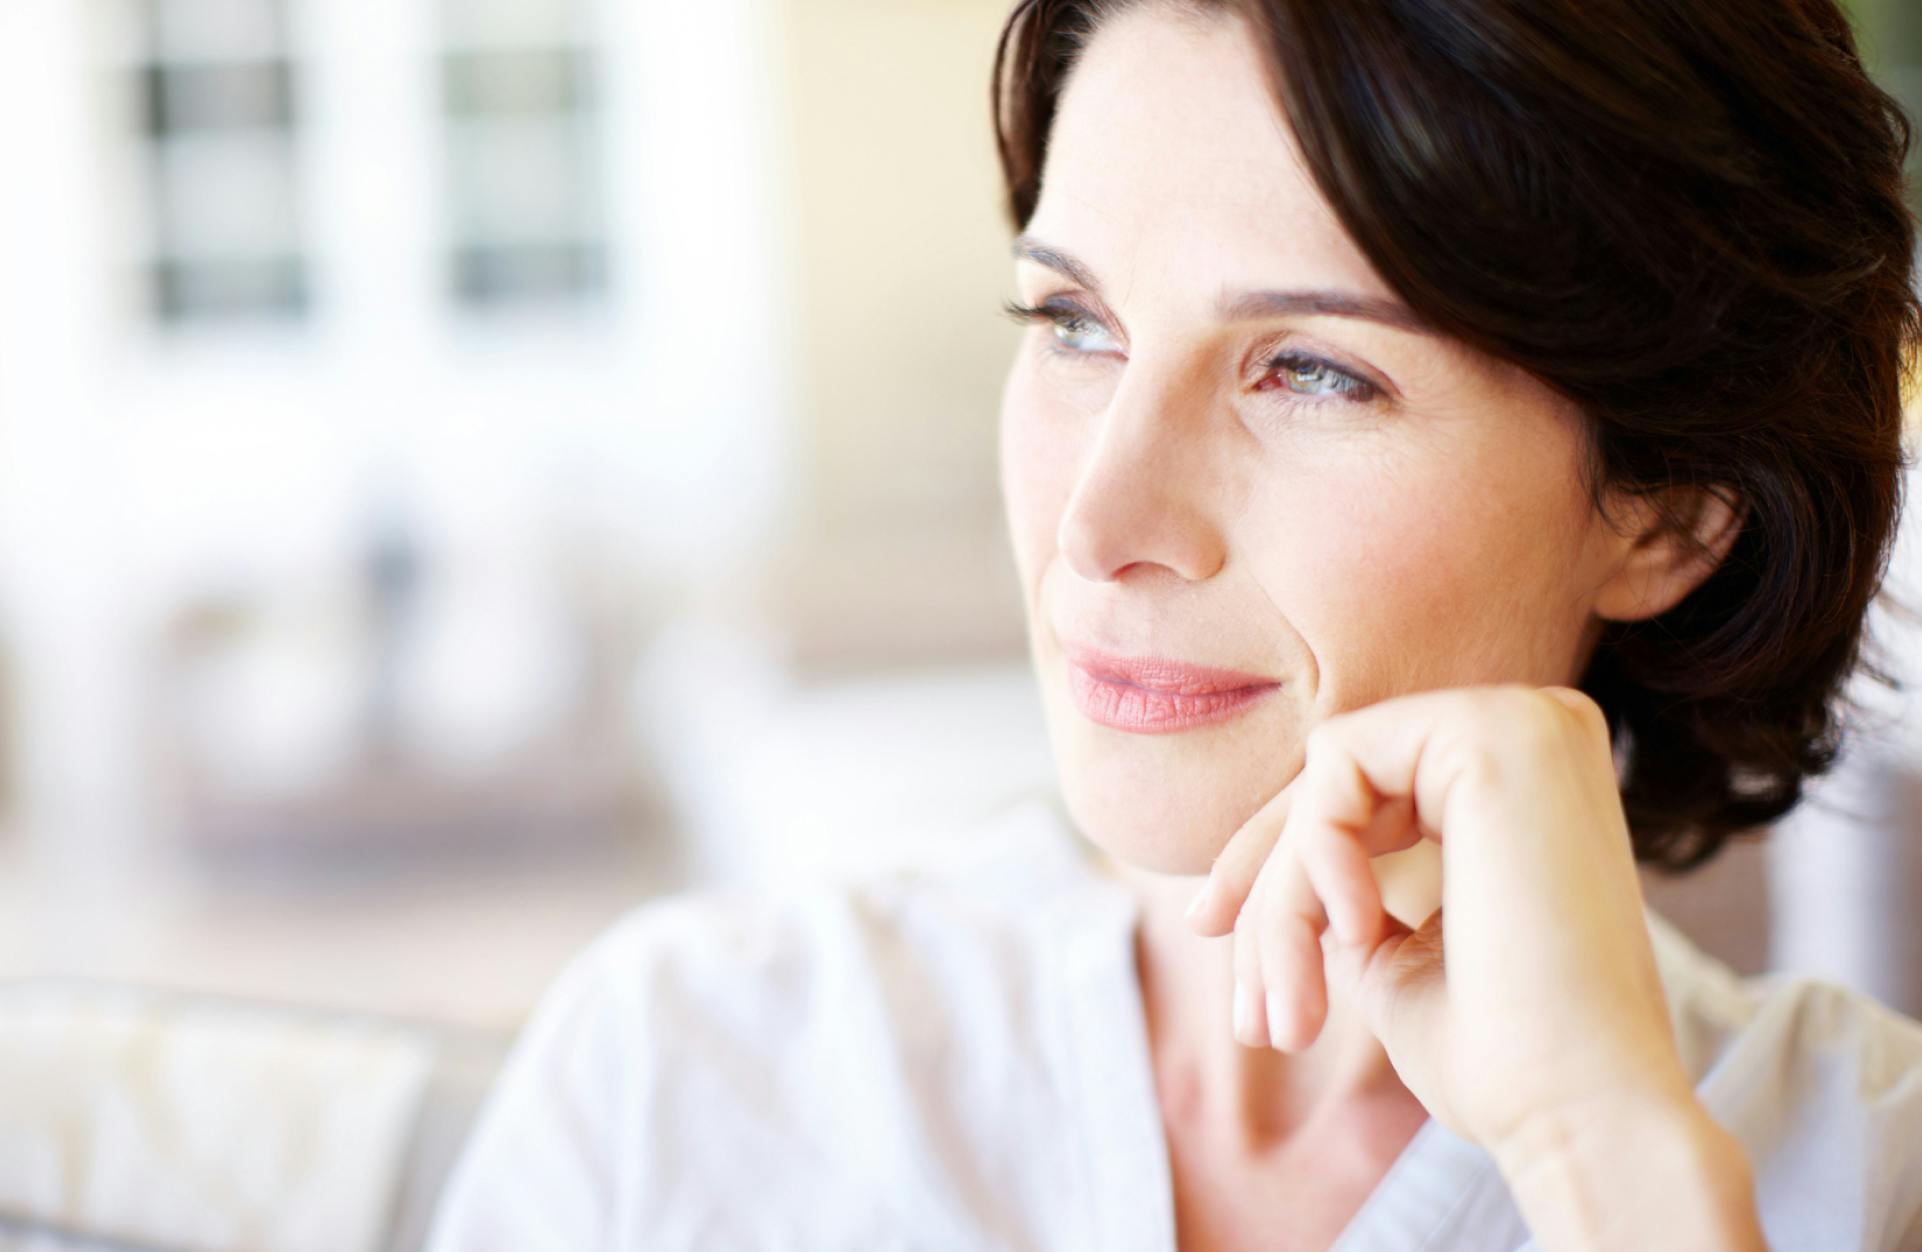 woman with short dark hair looking off into the distance